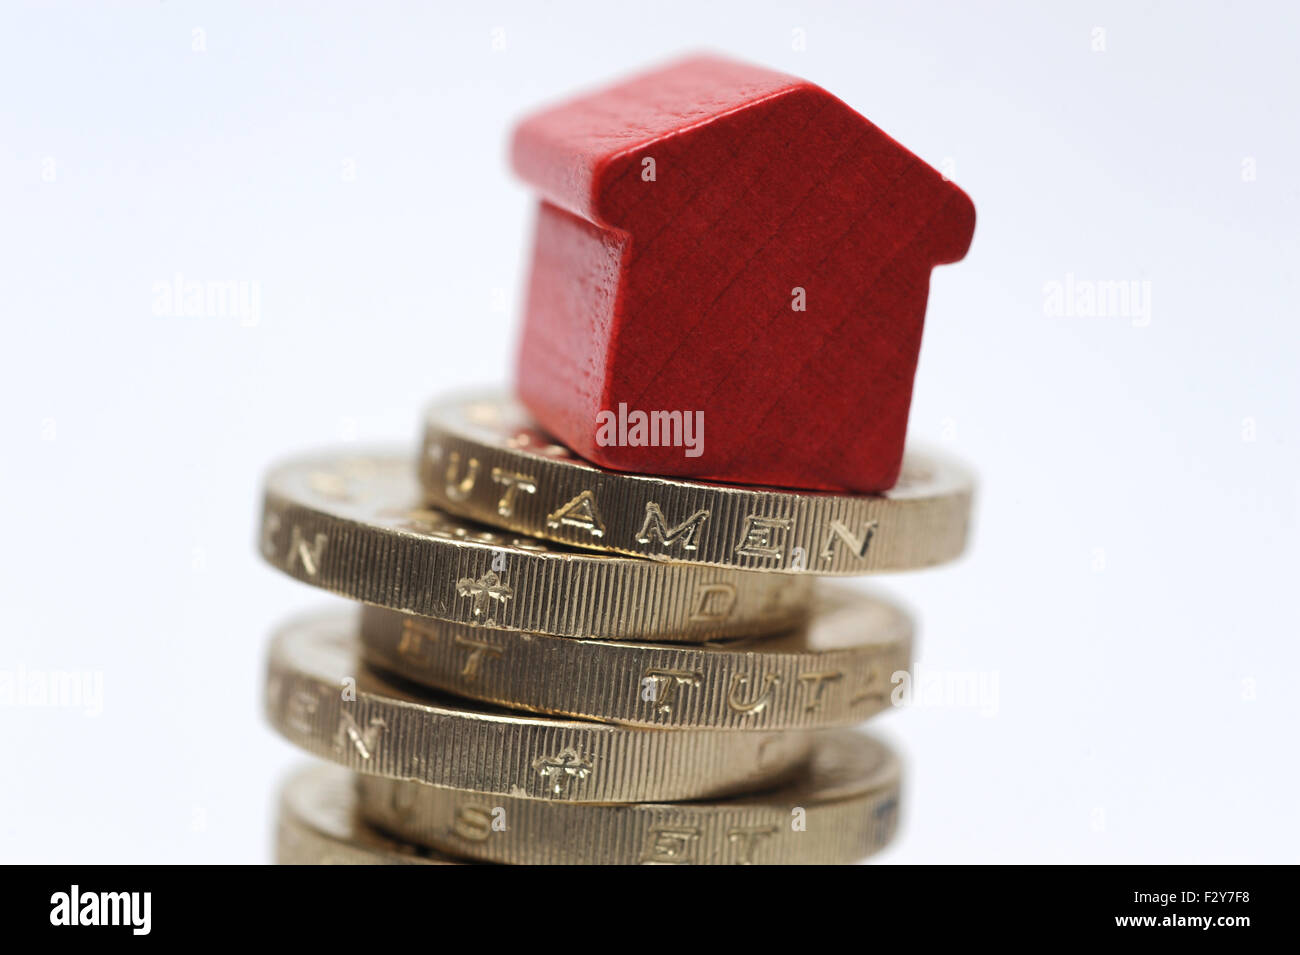 MODEL HOUSE ON STACK OF ONE POUND COINS RE HOME BUYERS BUYING HOUSING LADDER PROPERTY MARKET MORTGAGES INCOMES INTEREST RATES UK Stock Photo